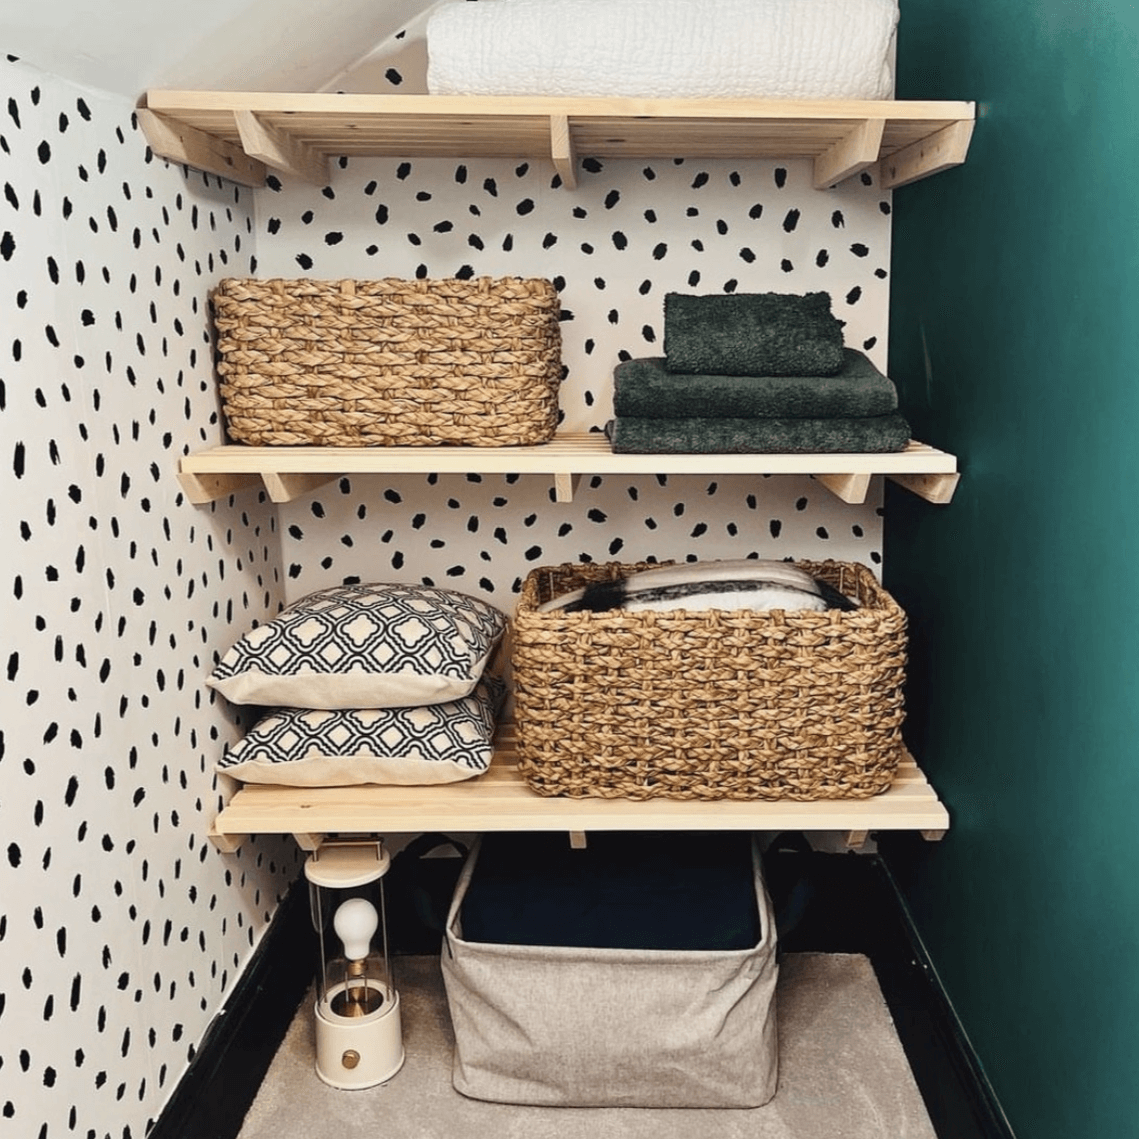 Airing Cupboard Wooden Slatted Shelves - 134 cm by 35 cm